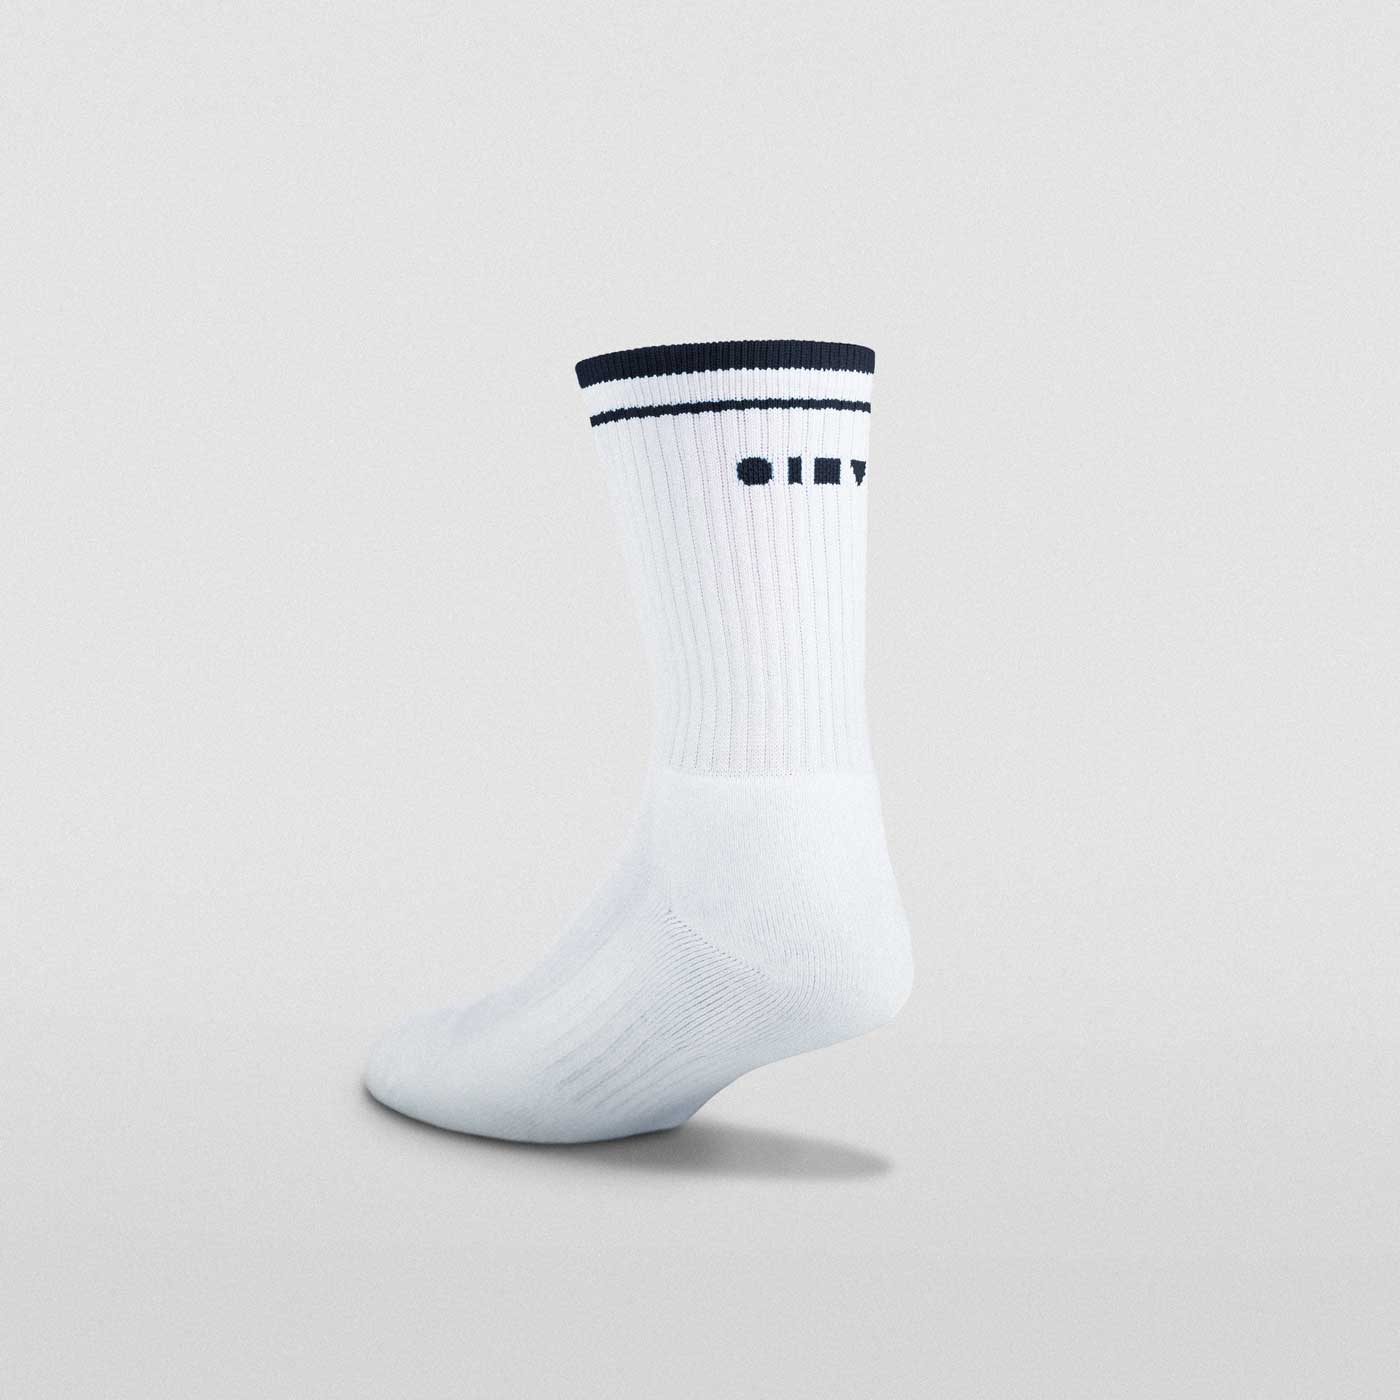 Clay Active men's white and black tennis sock on white background online shop image.